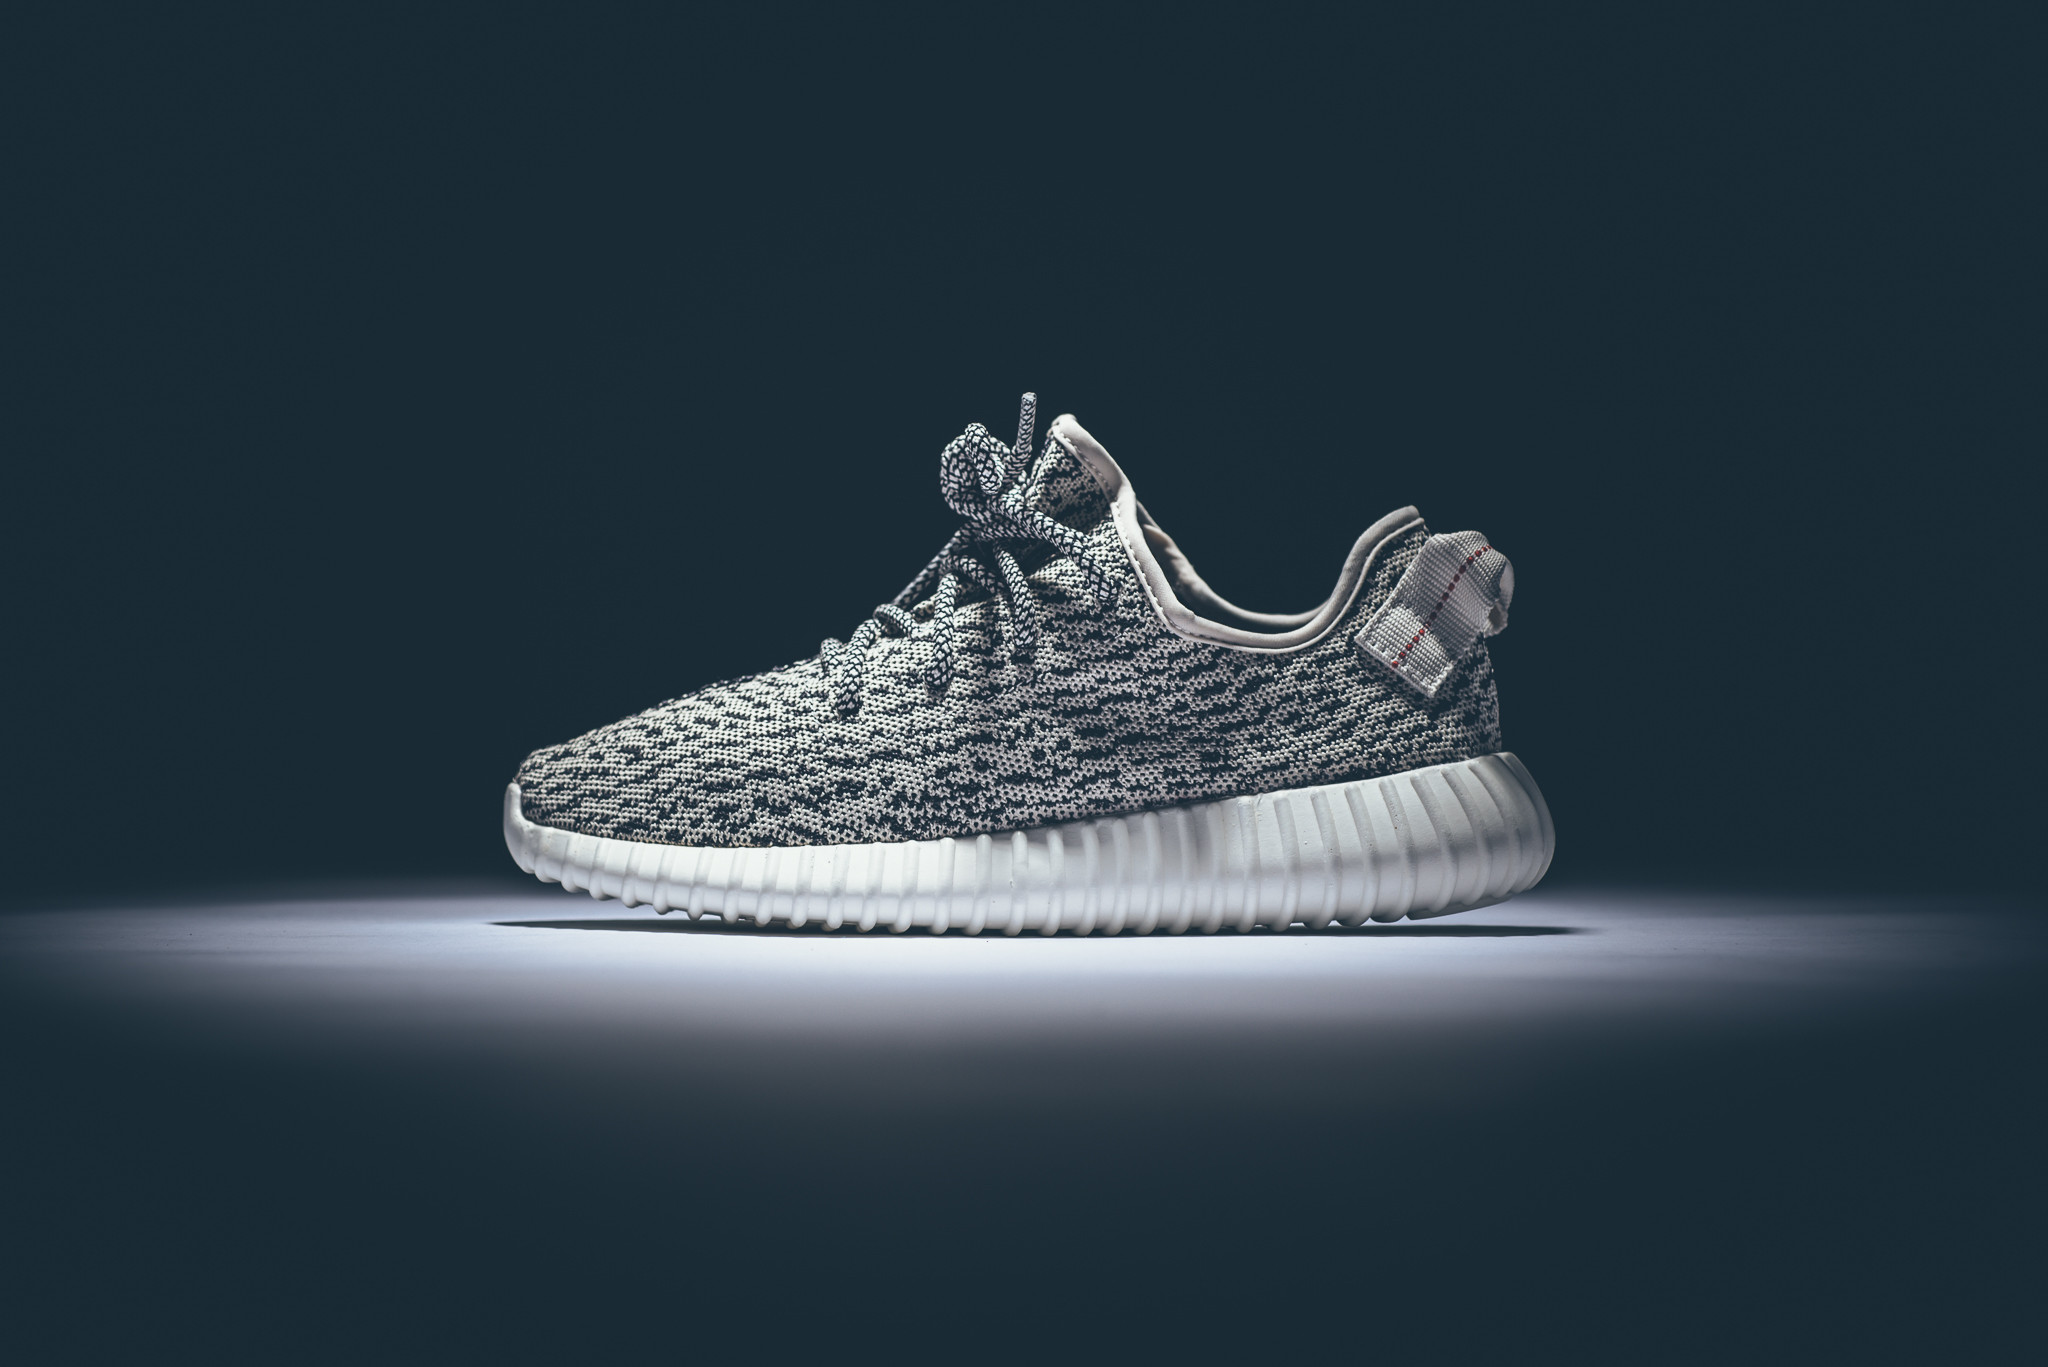 Cheap Gd Adidas Yeezy Boost 350 V2 Static Synth Reflective 5666